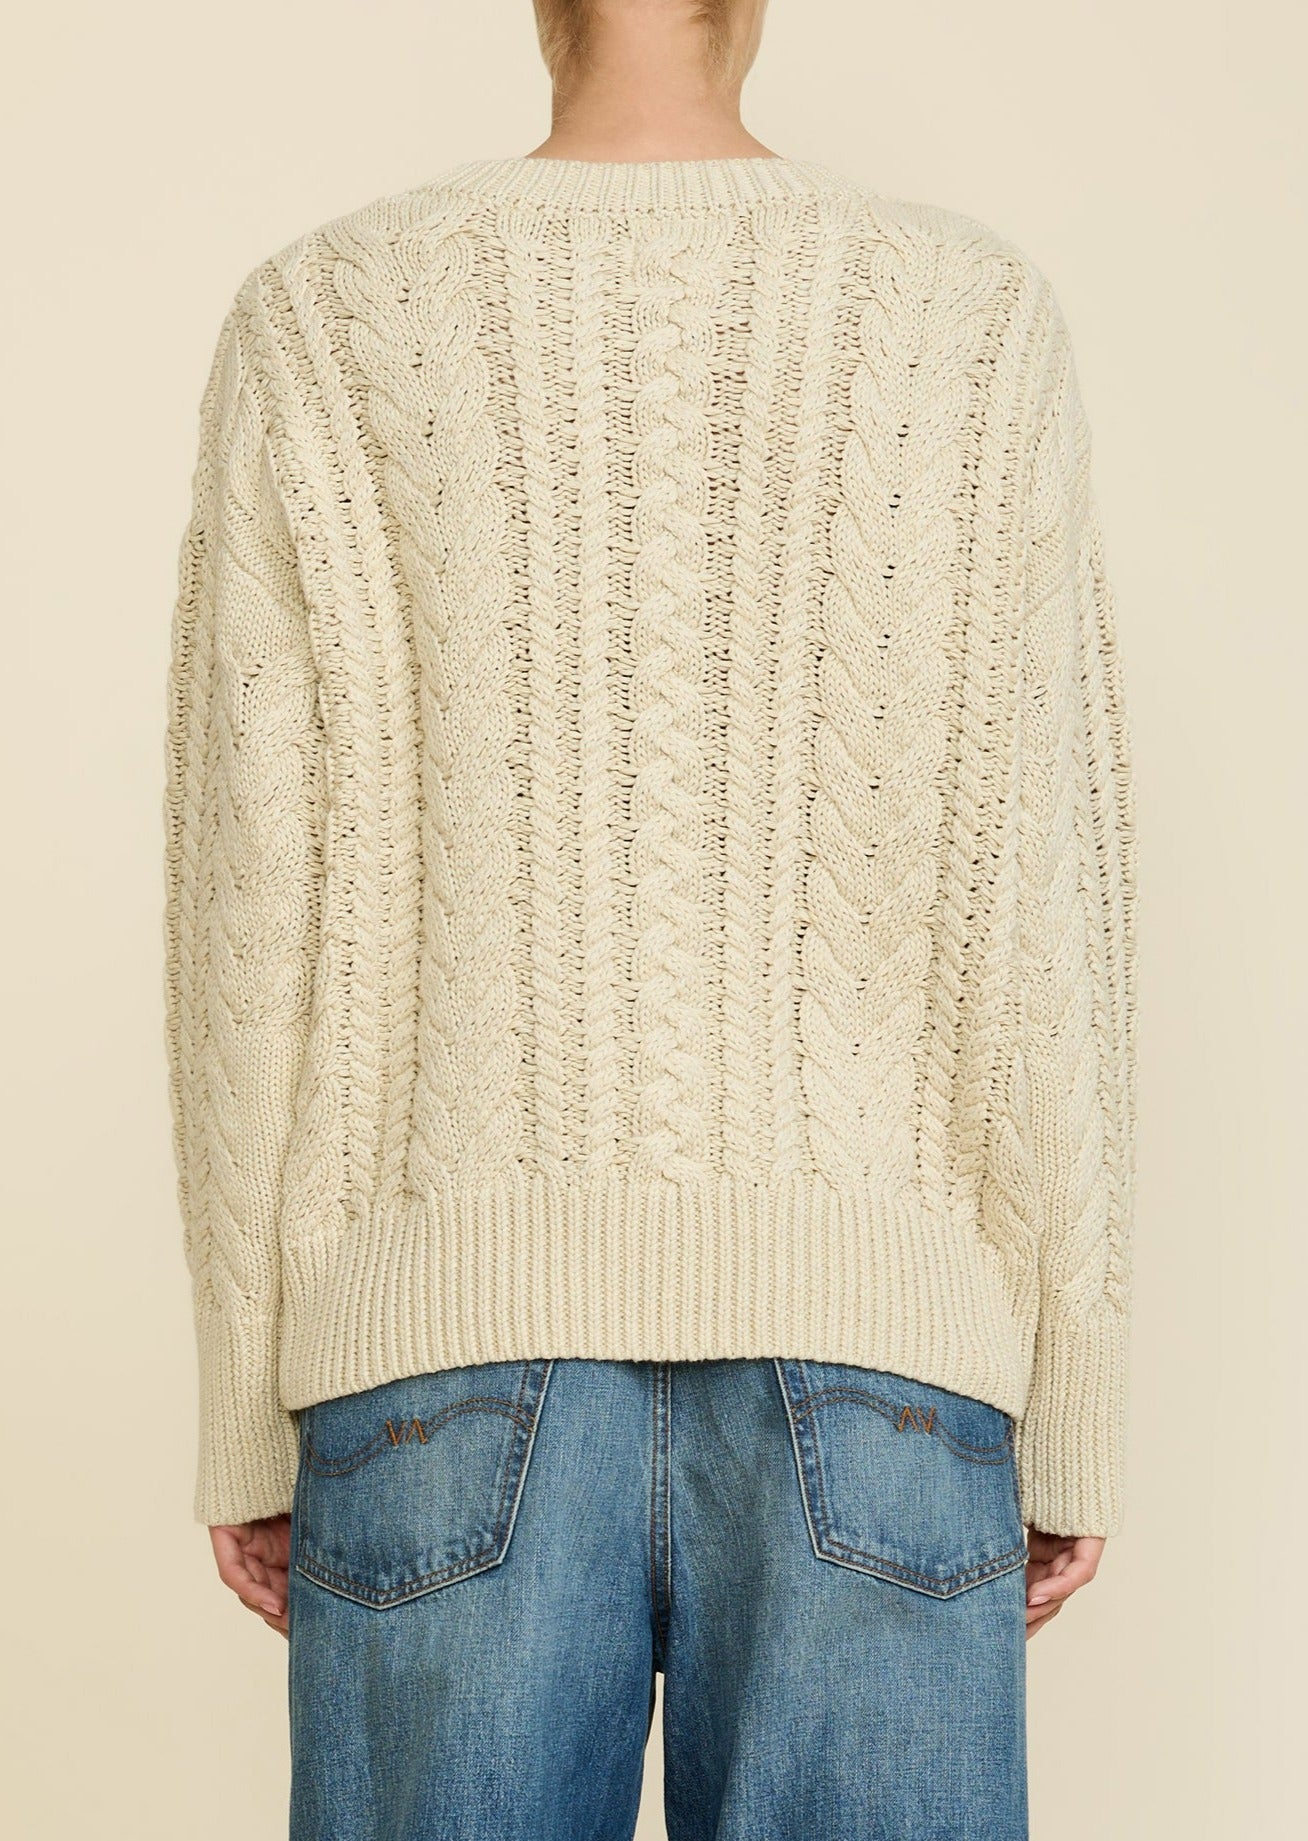 Cable Sweater - Oatmeal